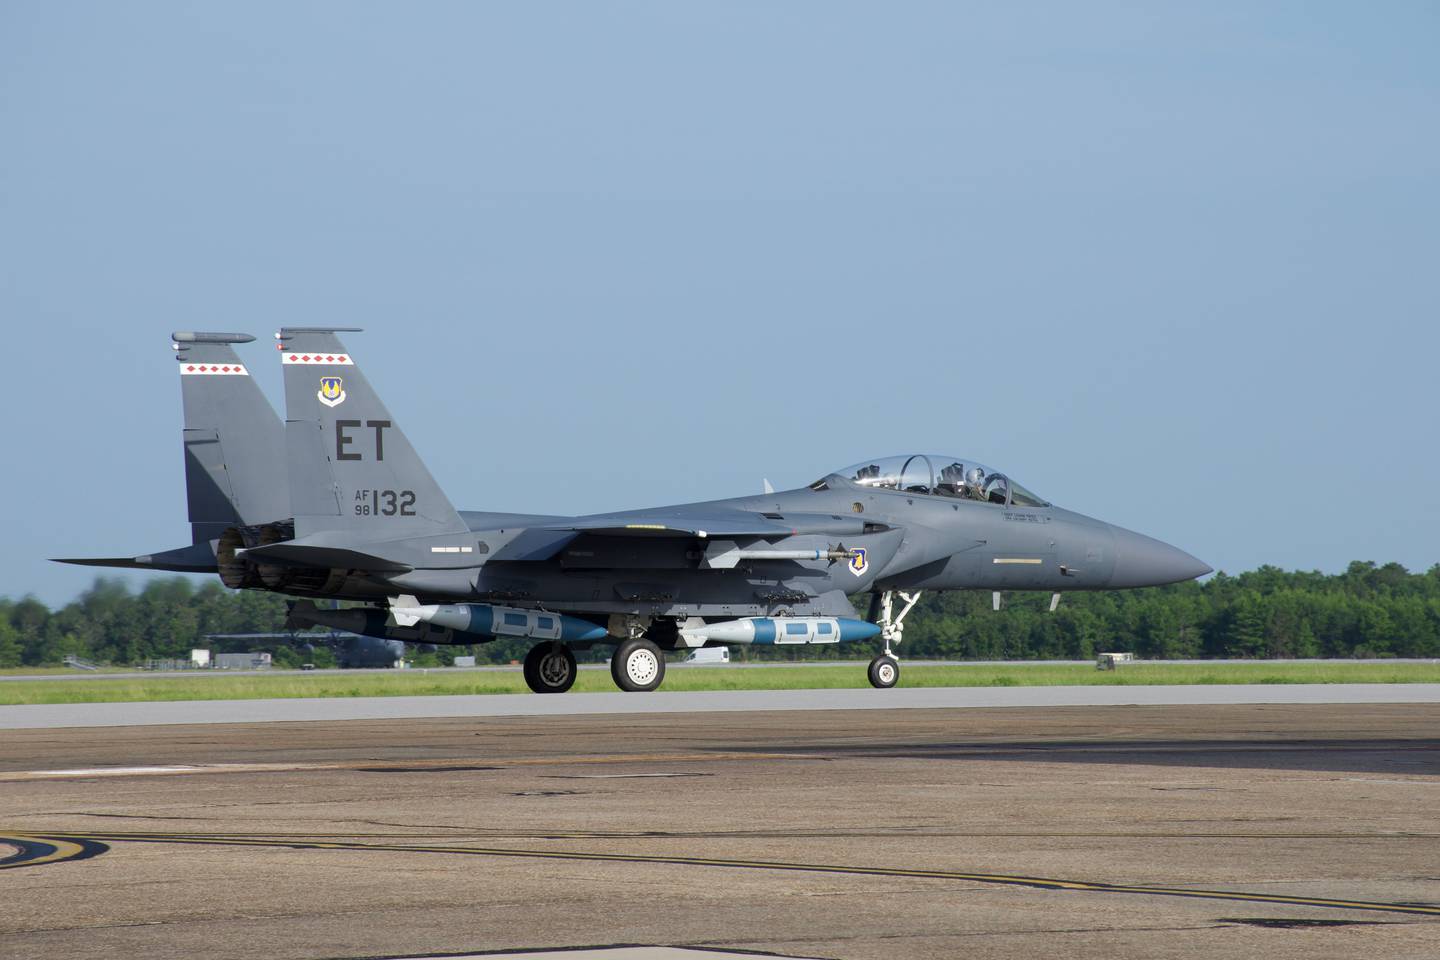 The 85th Test and Evaluation Squadron partnered with the Air Force Research Laboratory to equip the F-15E Strike Eagle with modified 2,000-pound GBU-31 Joint Direct Attack Munitions that can hit warships at sea. Three F-15Es participated in the "Quicksink" testing on Aug. 26, 2021. (1st Lt. Lindsey Heflin/Air Force)